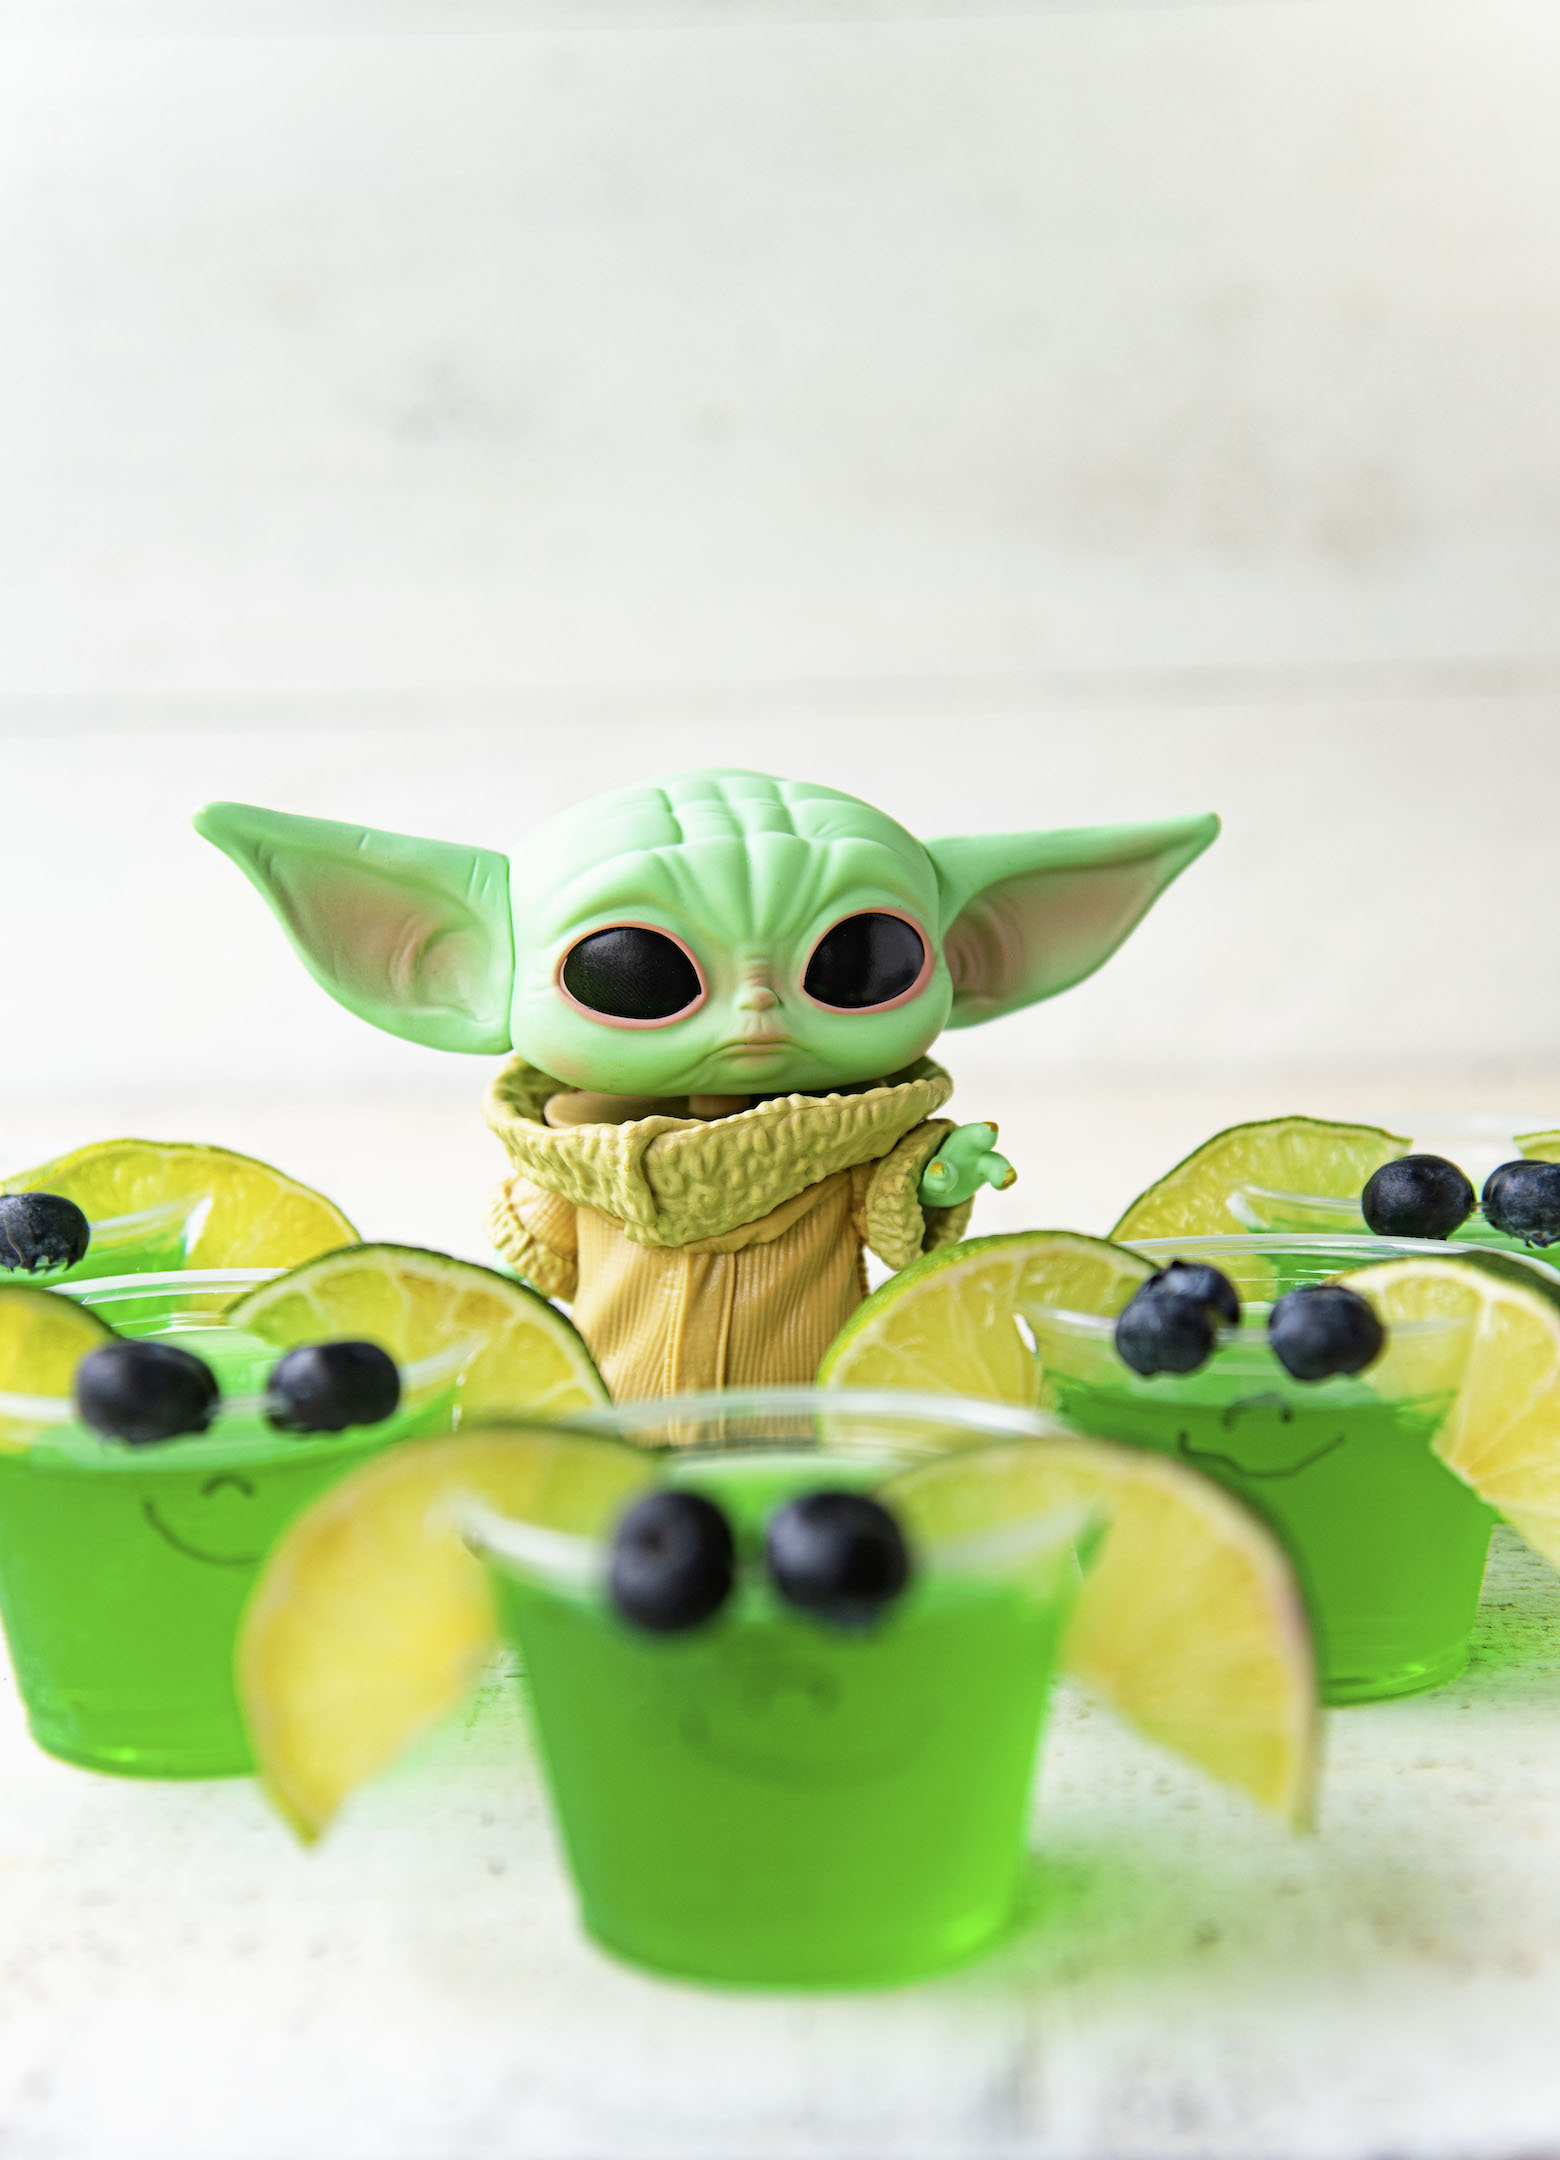 These Baby Yoda Ice Molds Will Make Your Cocktail Out of This World